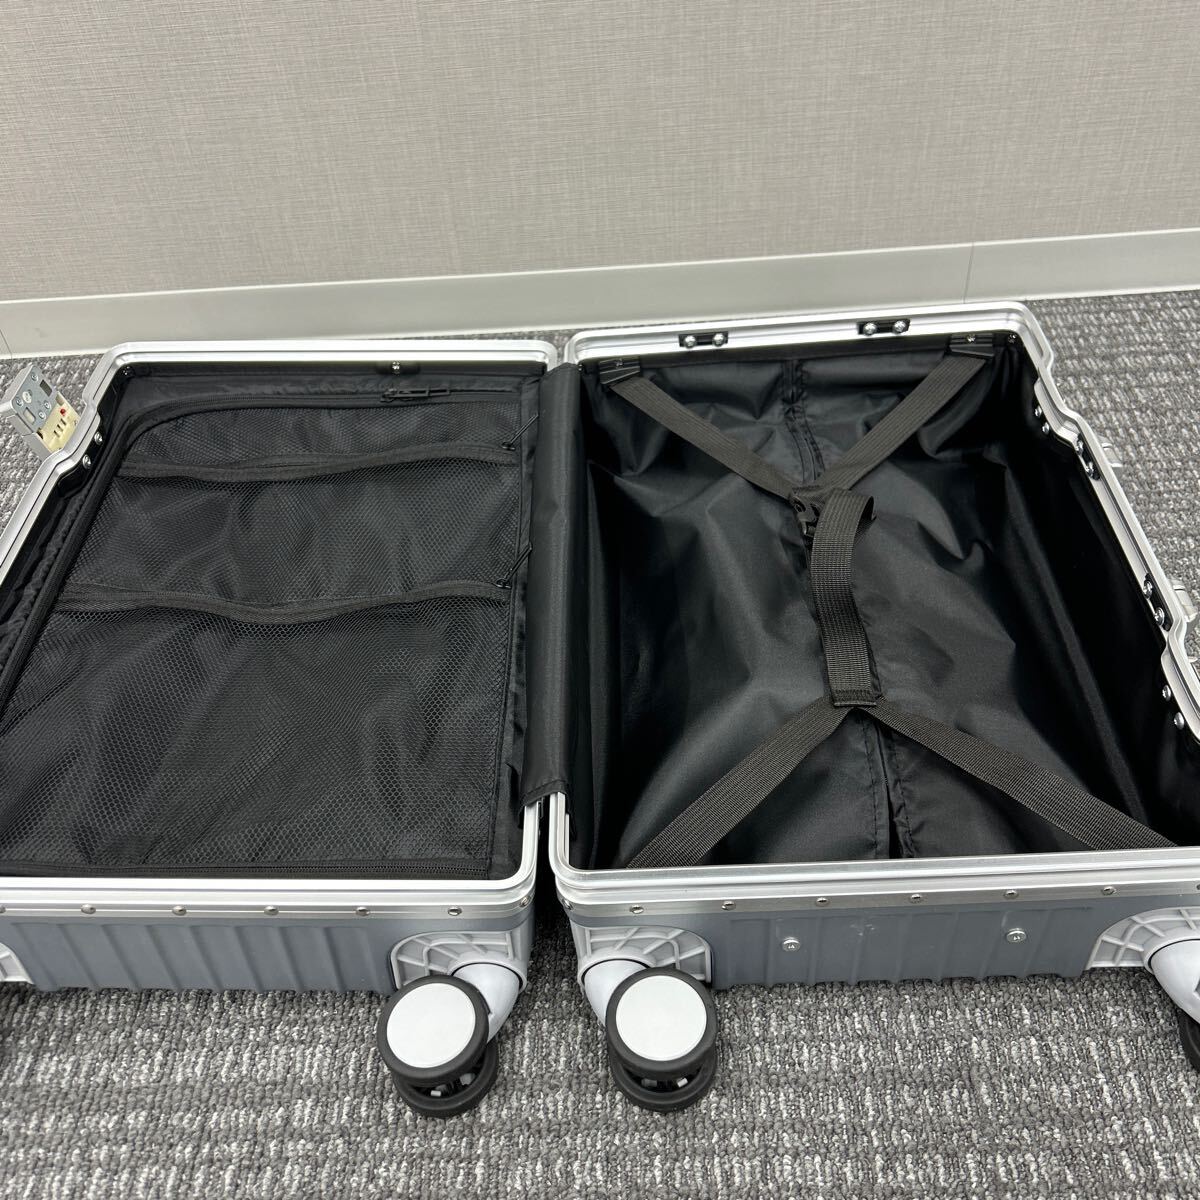  Carry case suitcase machine inside bringing in 40L carry bag silver 